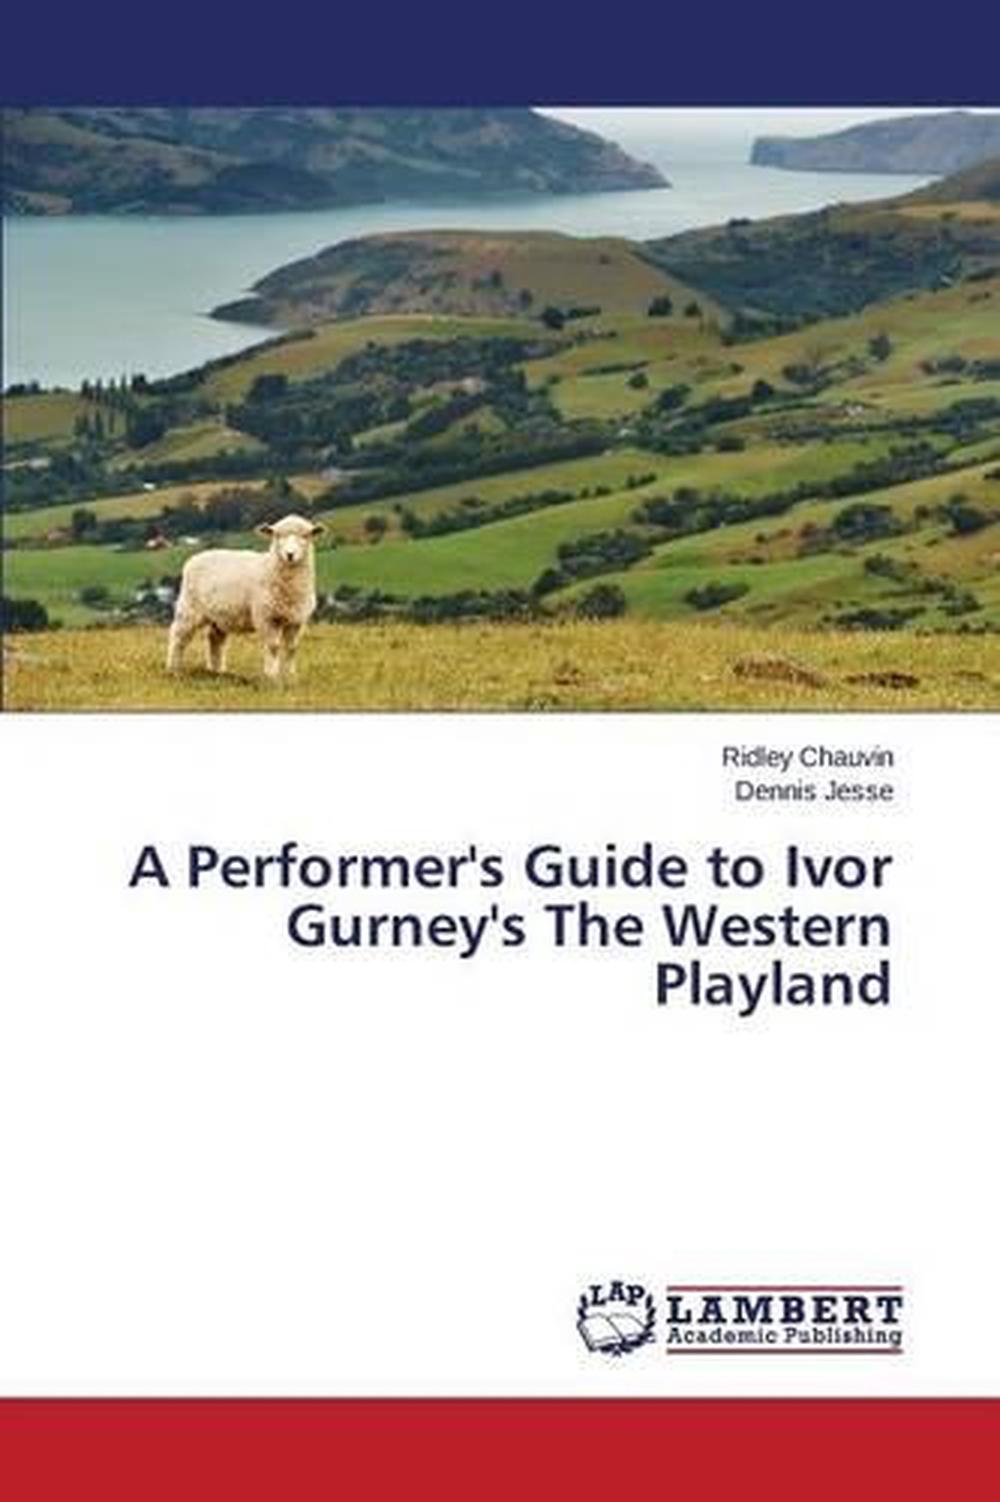 A Performer's Guide to Ivor Gurney's the Western Playland ...